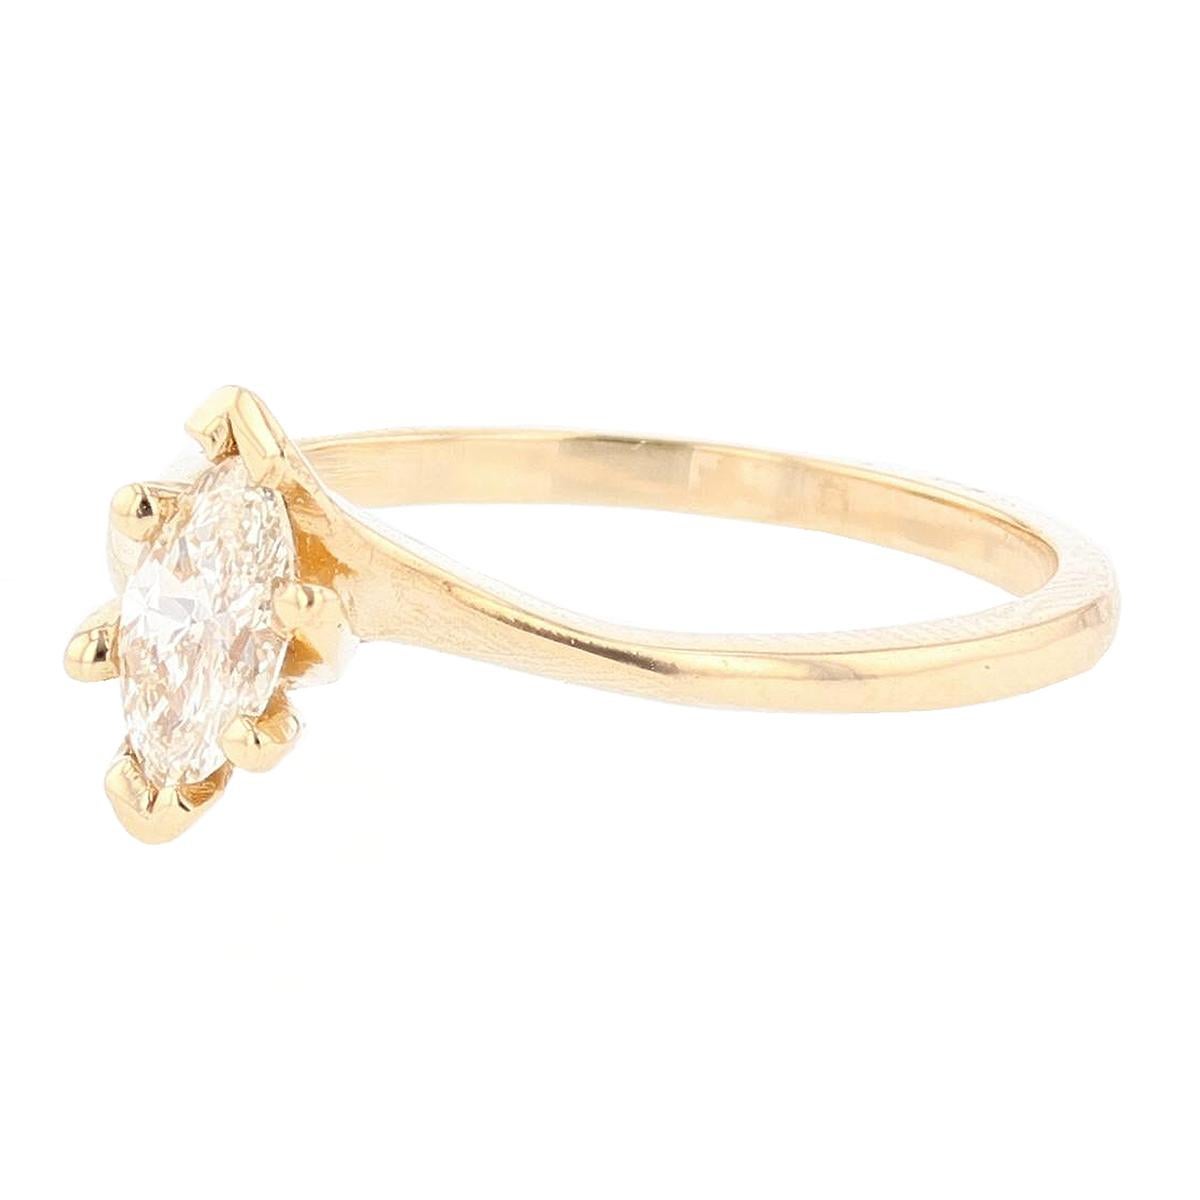 This ring is made with 14 karat yellow and white gold and features a bezel set 0.35ct Marquise cut diamond  with a color grade (H) and clarity grade (SI2). 